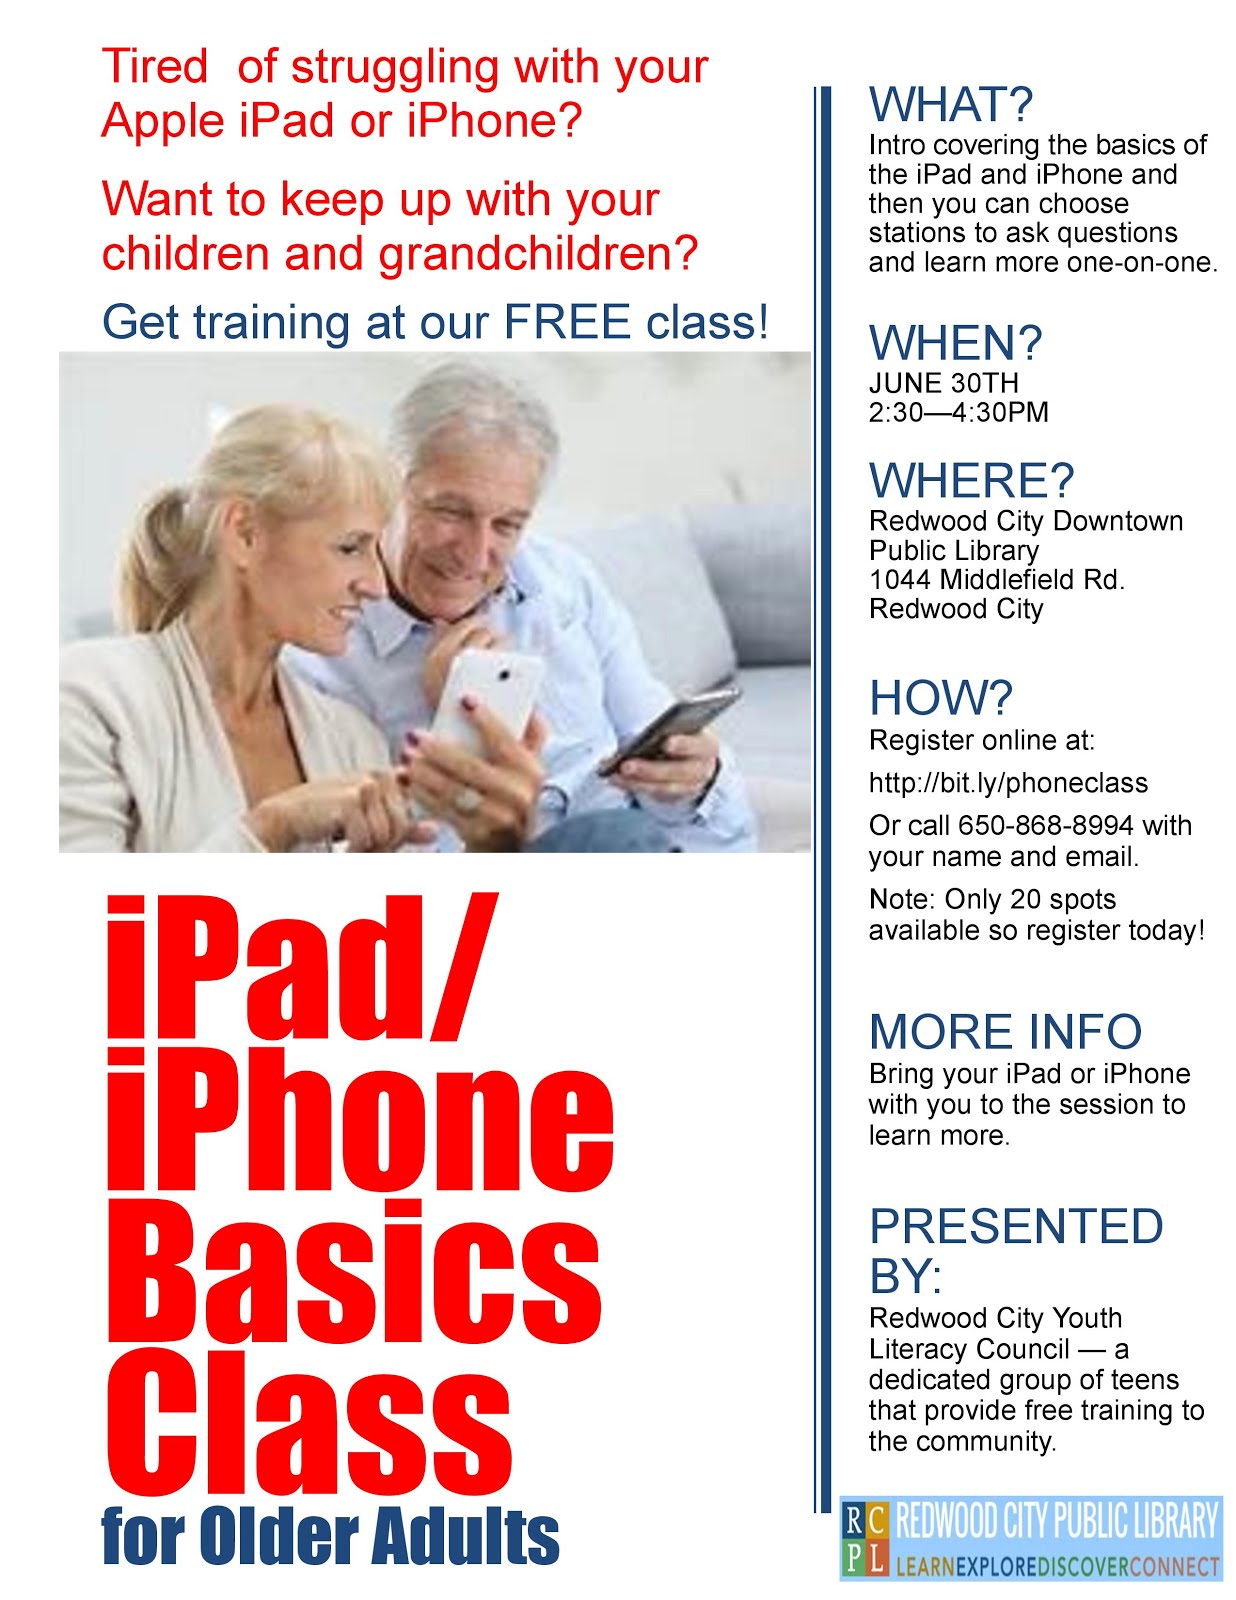 iPad/iPhone Class for Older Adults